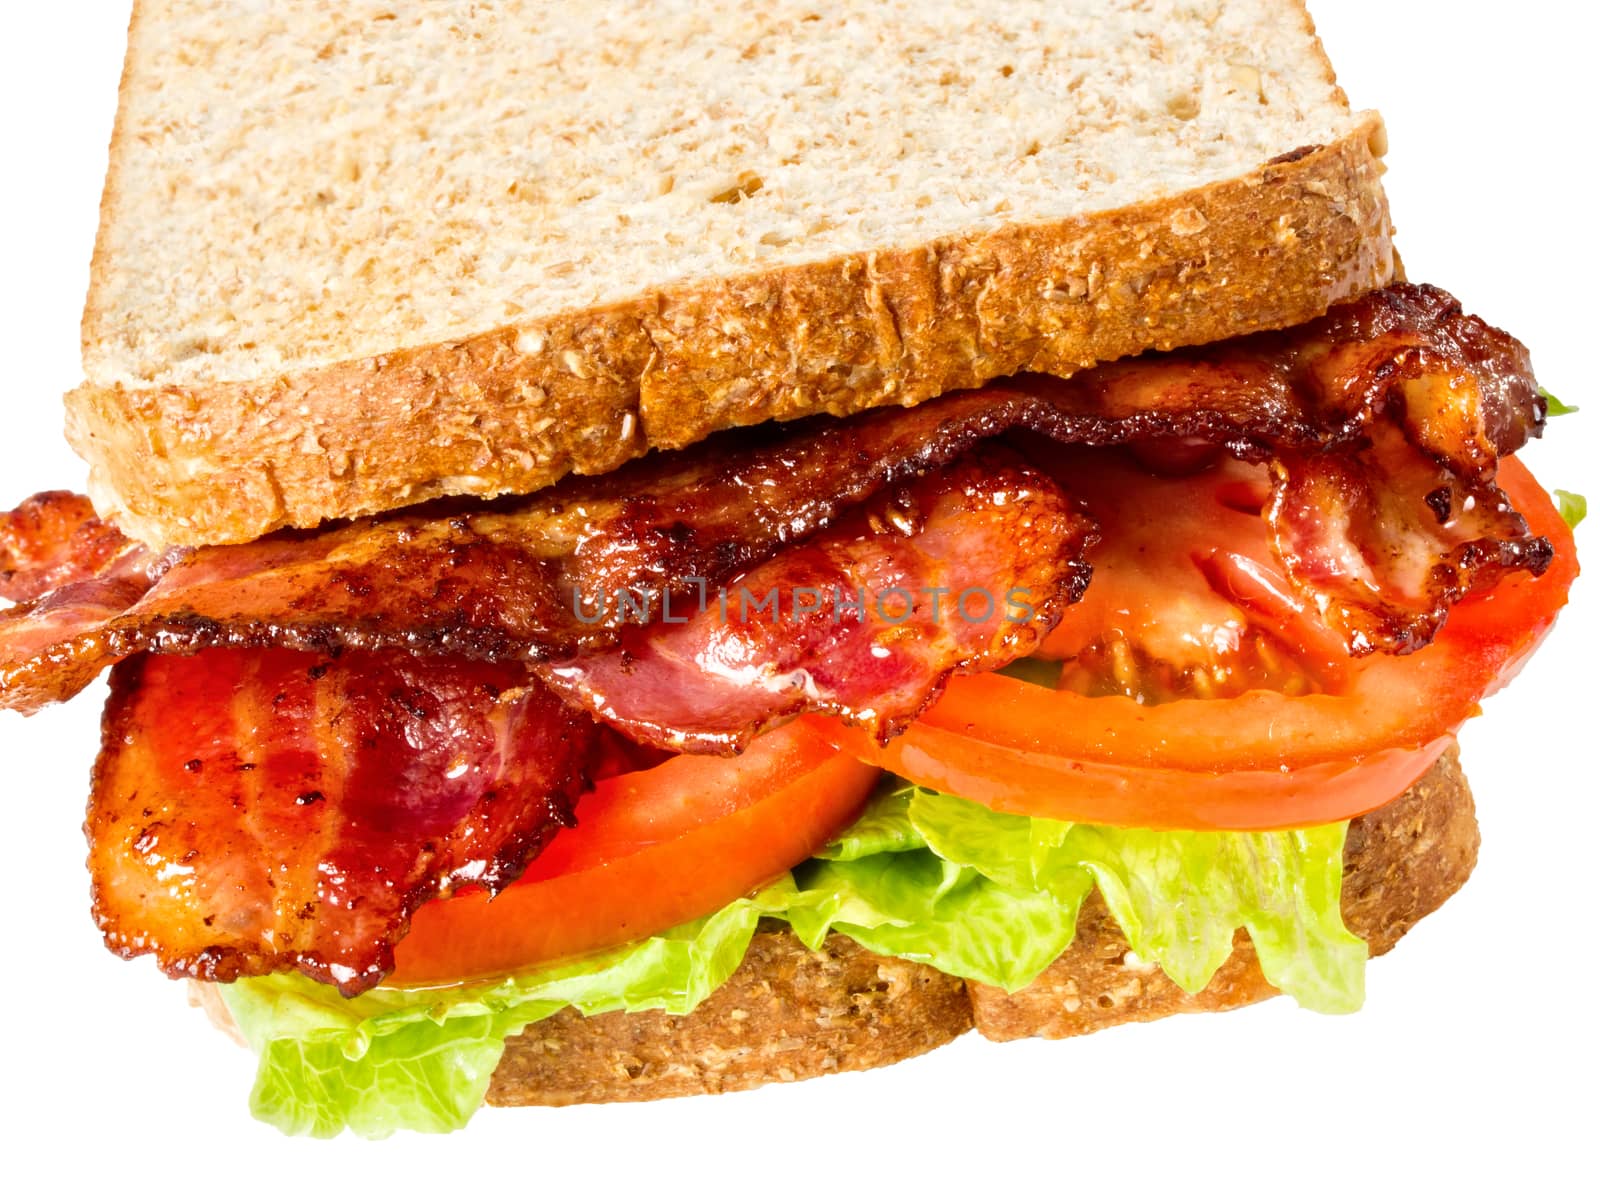 close up of juicy bacon lettuce and tomato sandwich